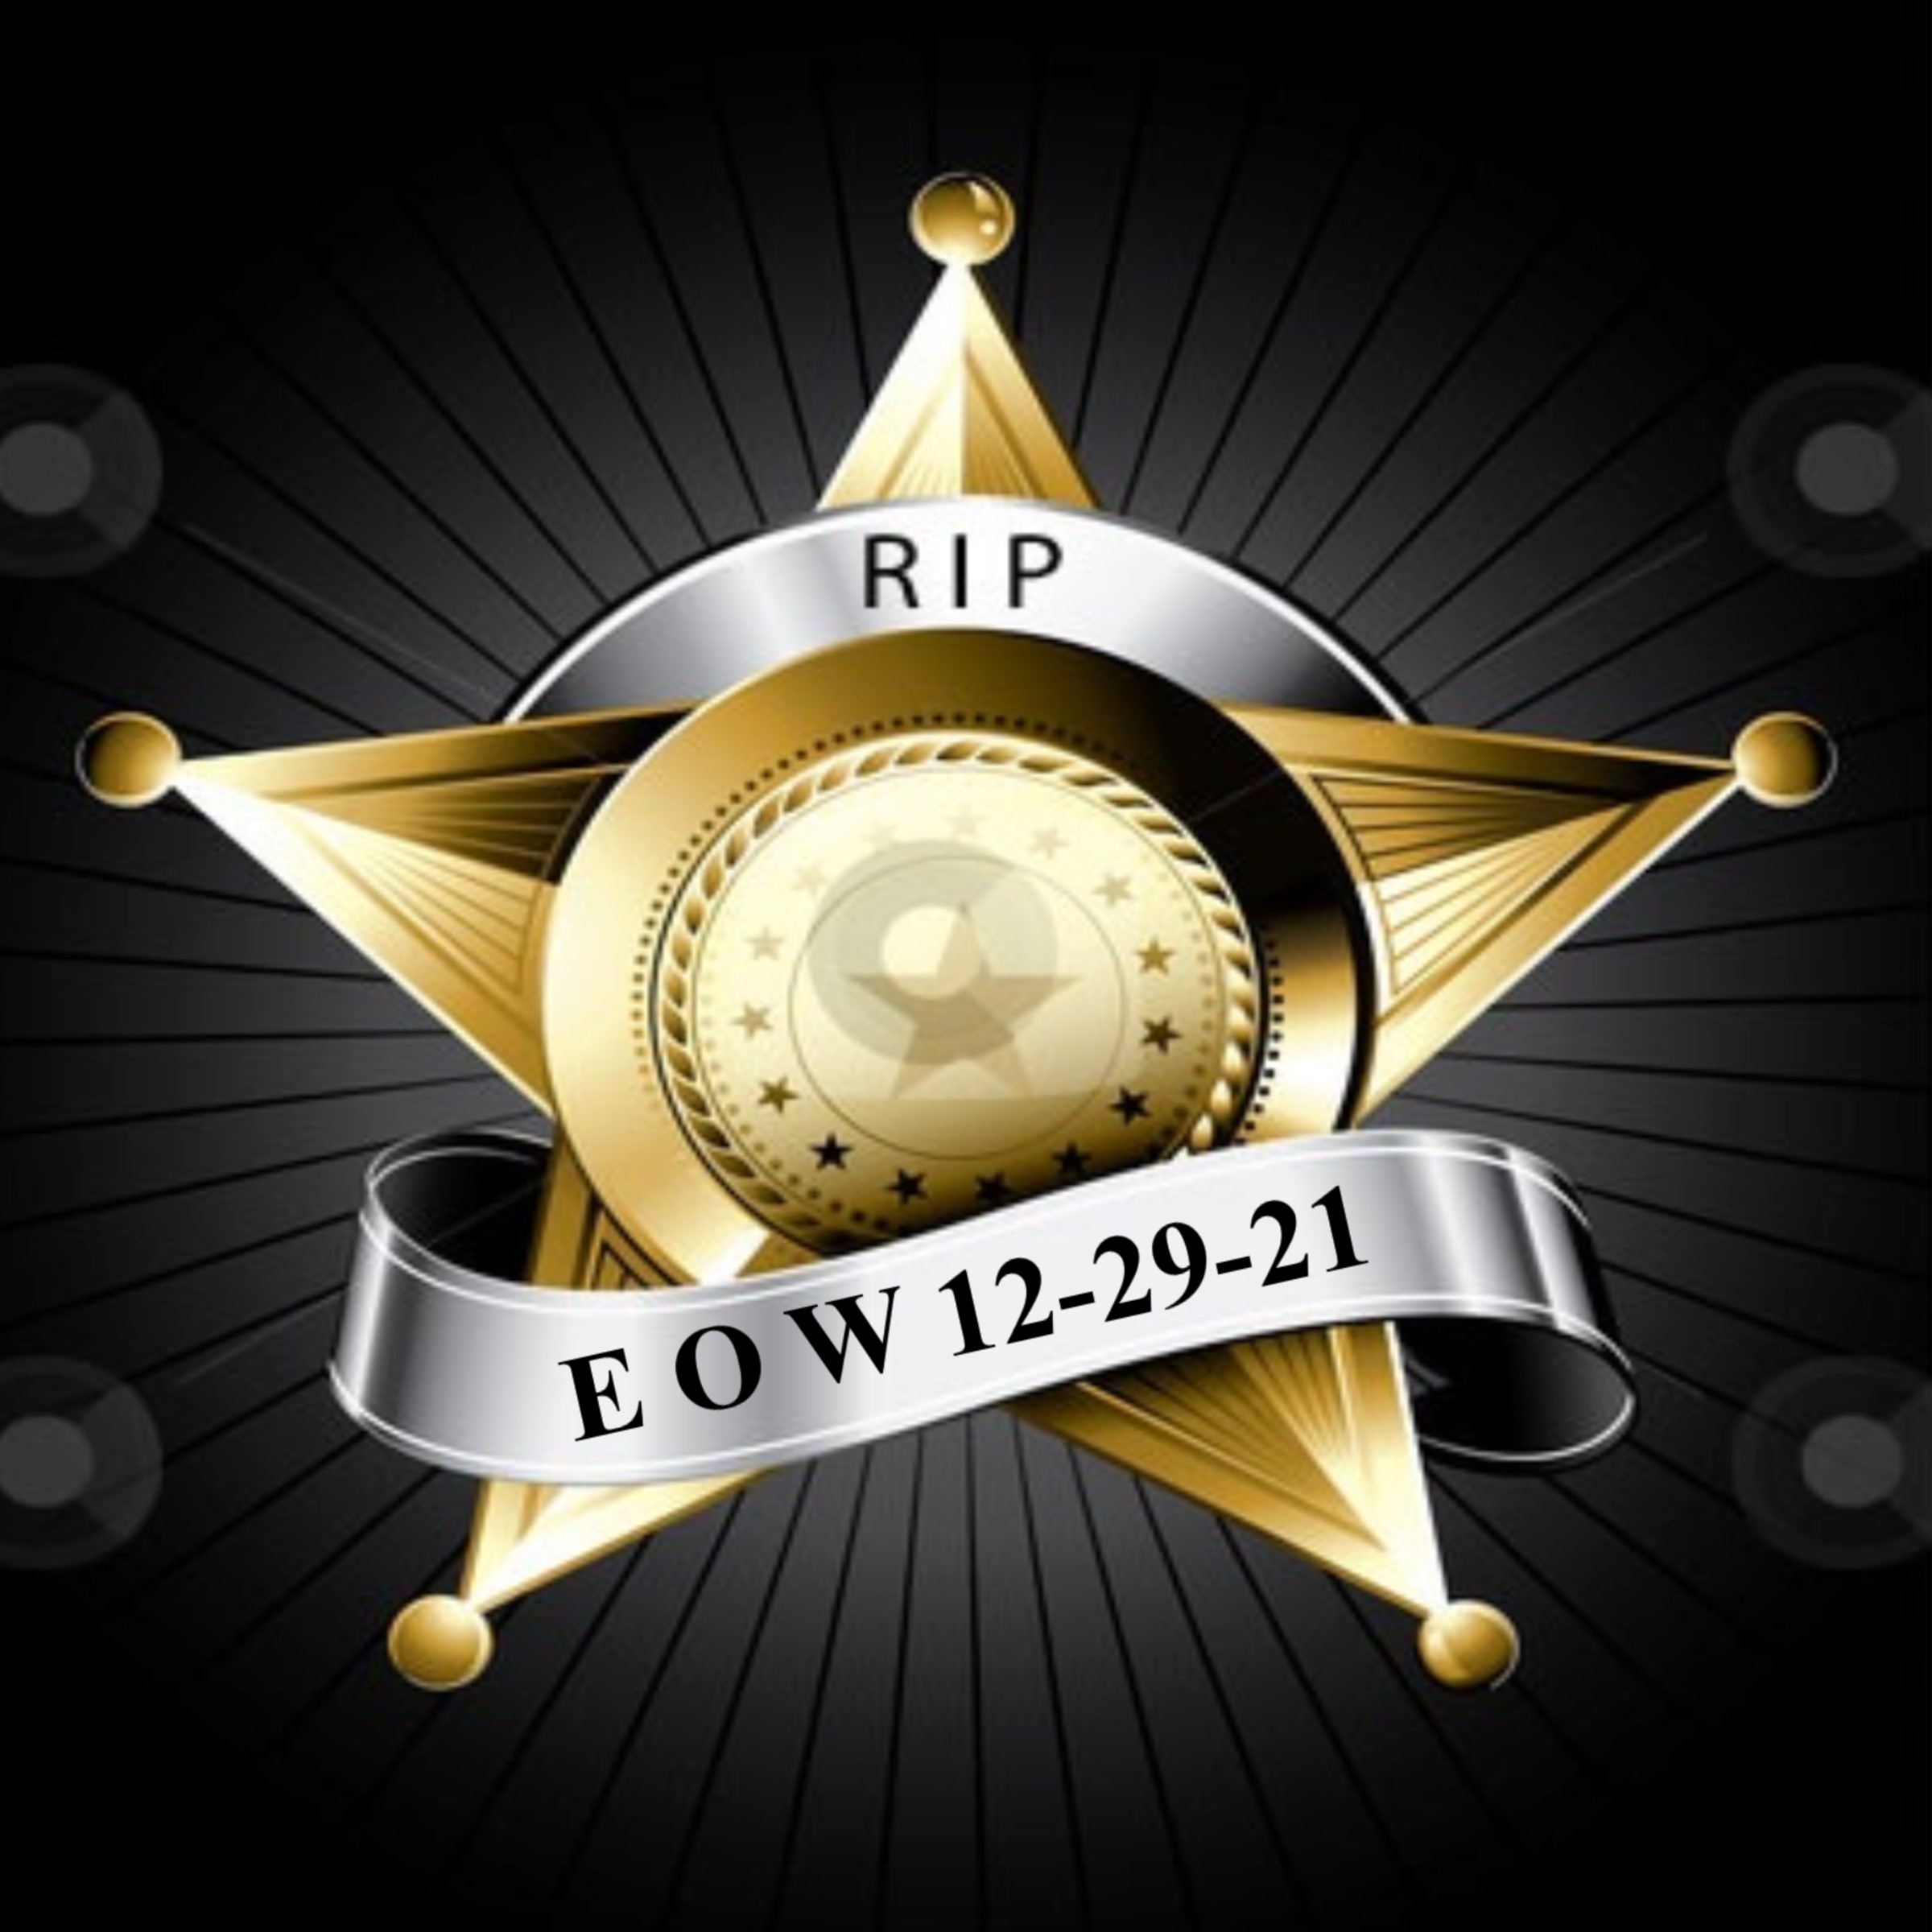 End of Watch: Wayne County Sheriff's Office, Illinois